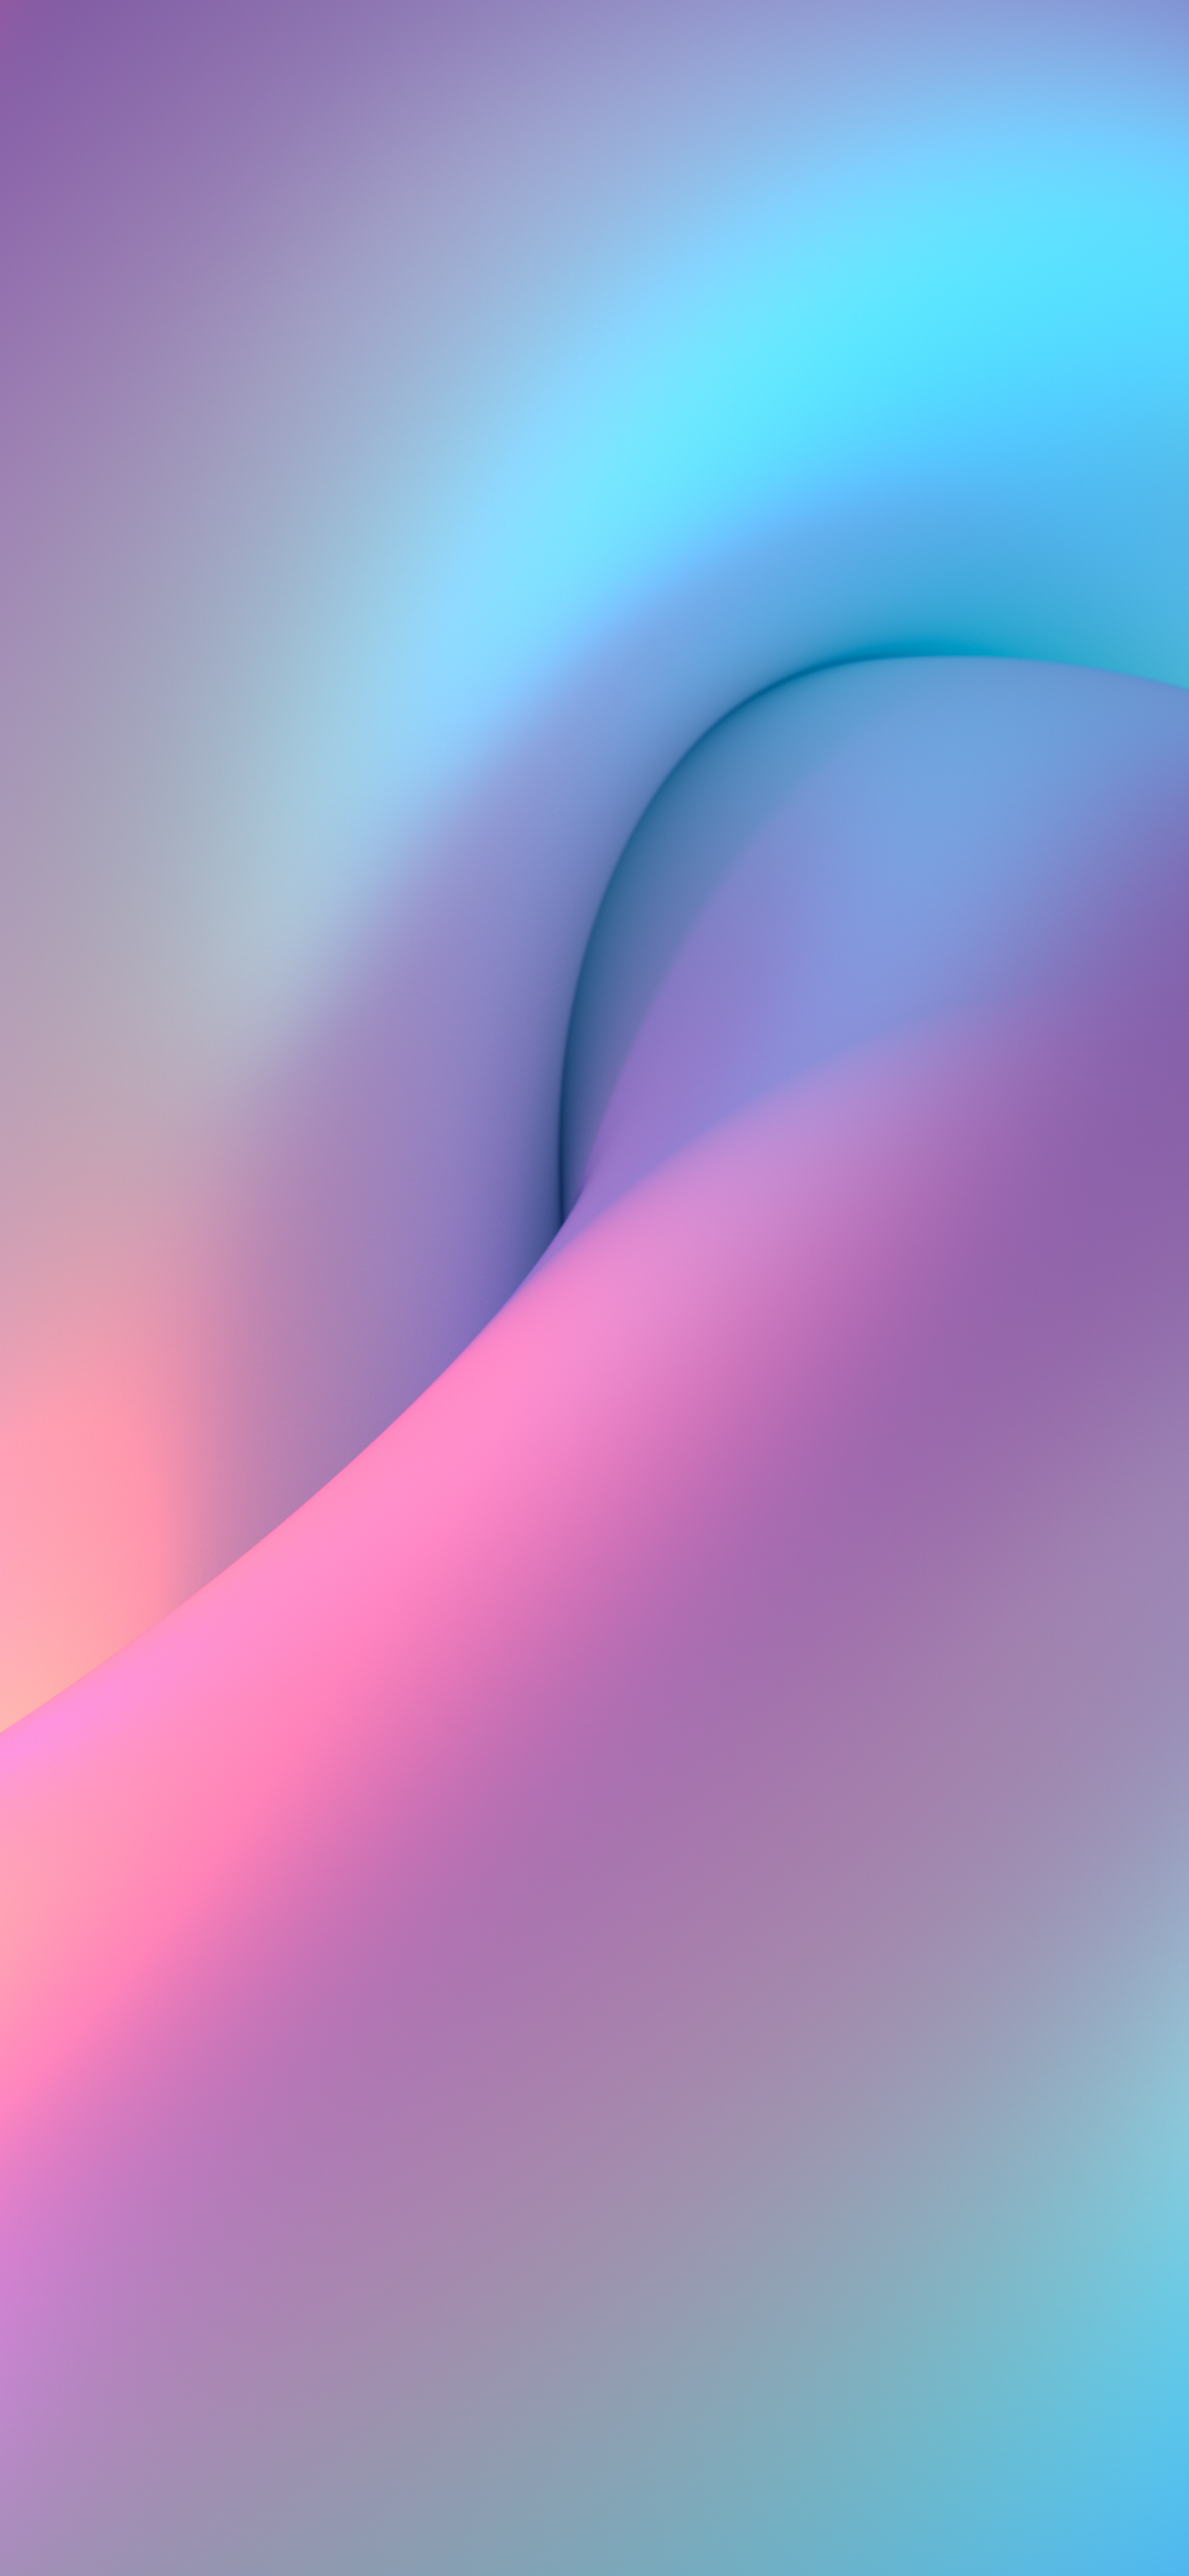 iPhone X Wallpapers from Design Team   Album on Imgur